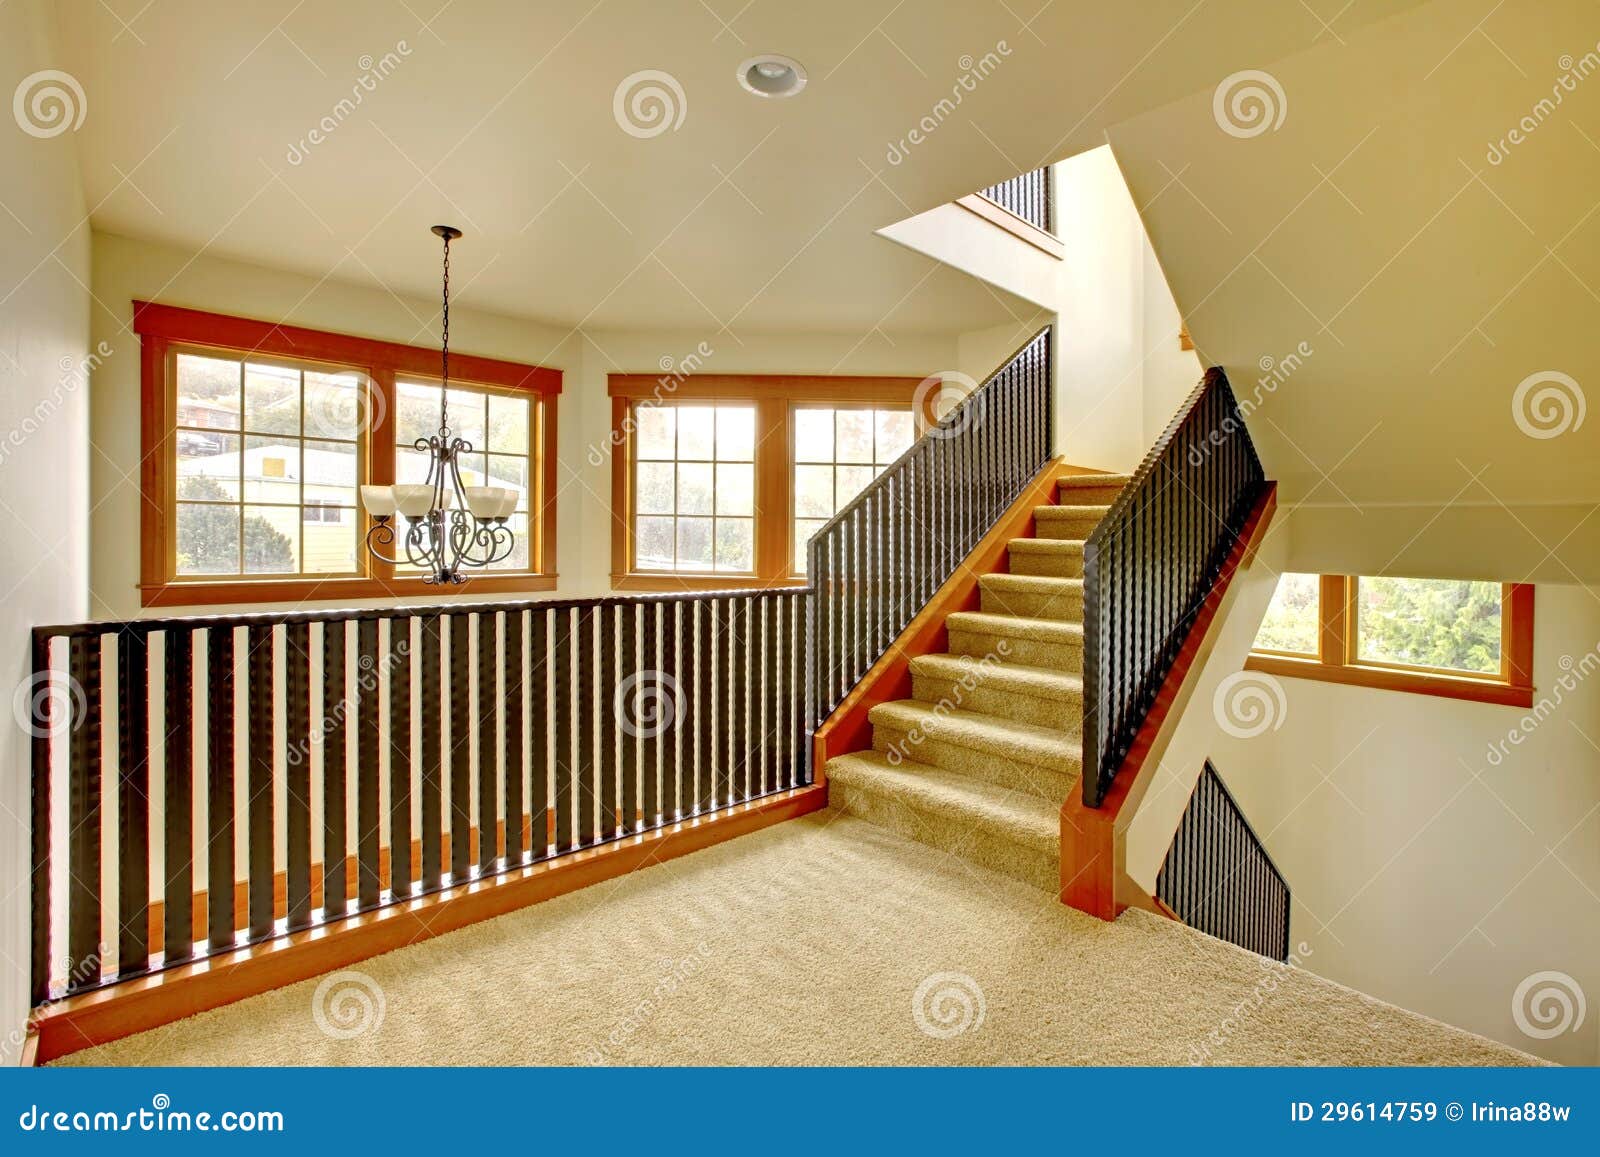 staircase with metal railing. new luxury home interior.